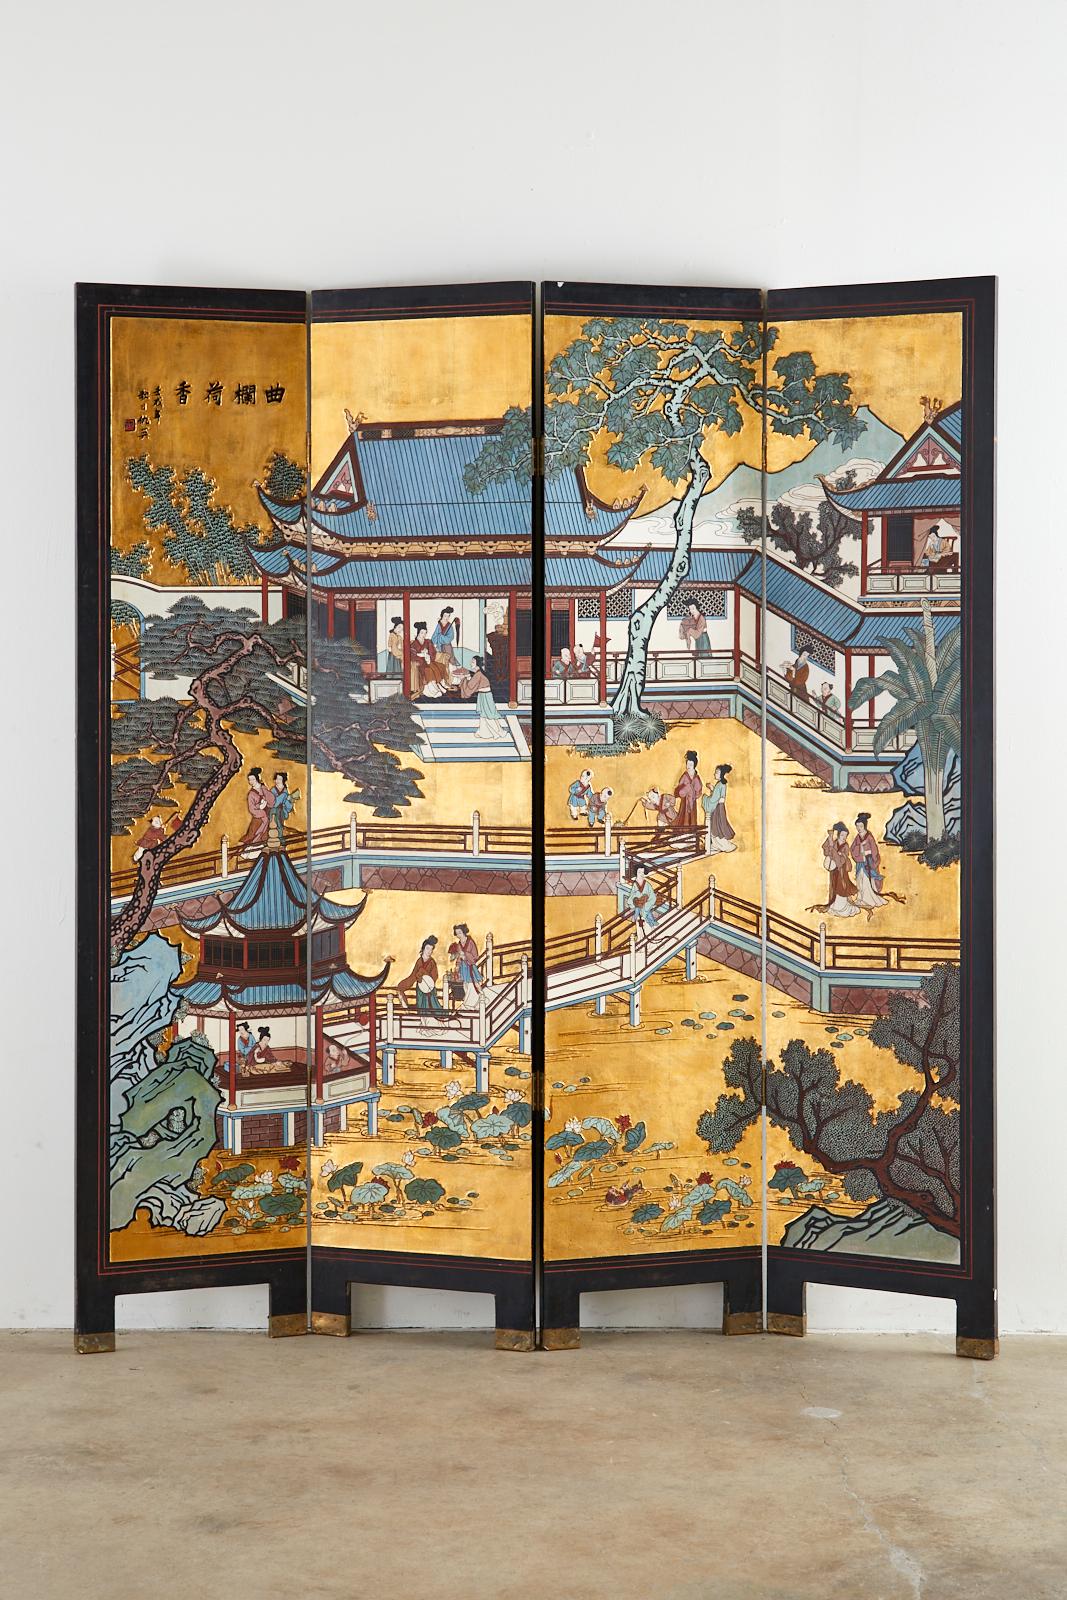 Fantastic Chinese export four-panel Coromandel screen featuring a stunning gold leaf background. The black lacquered hardwood panels are incised with vibrant color depicting an idyllic landscaped courtyard. Colorful pagodas and trees decorate the